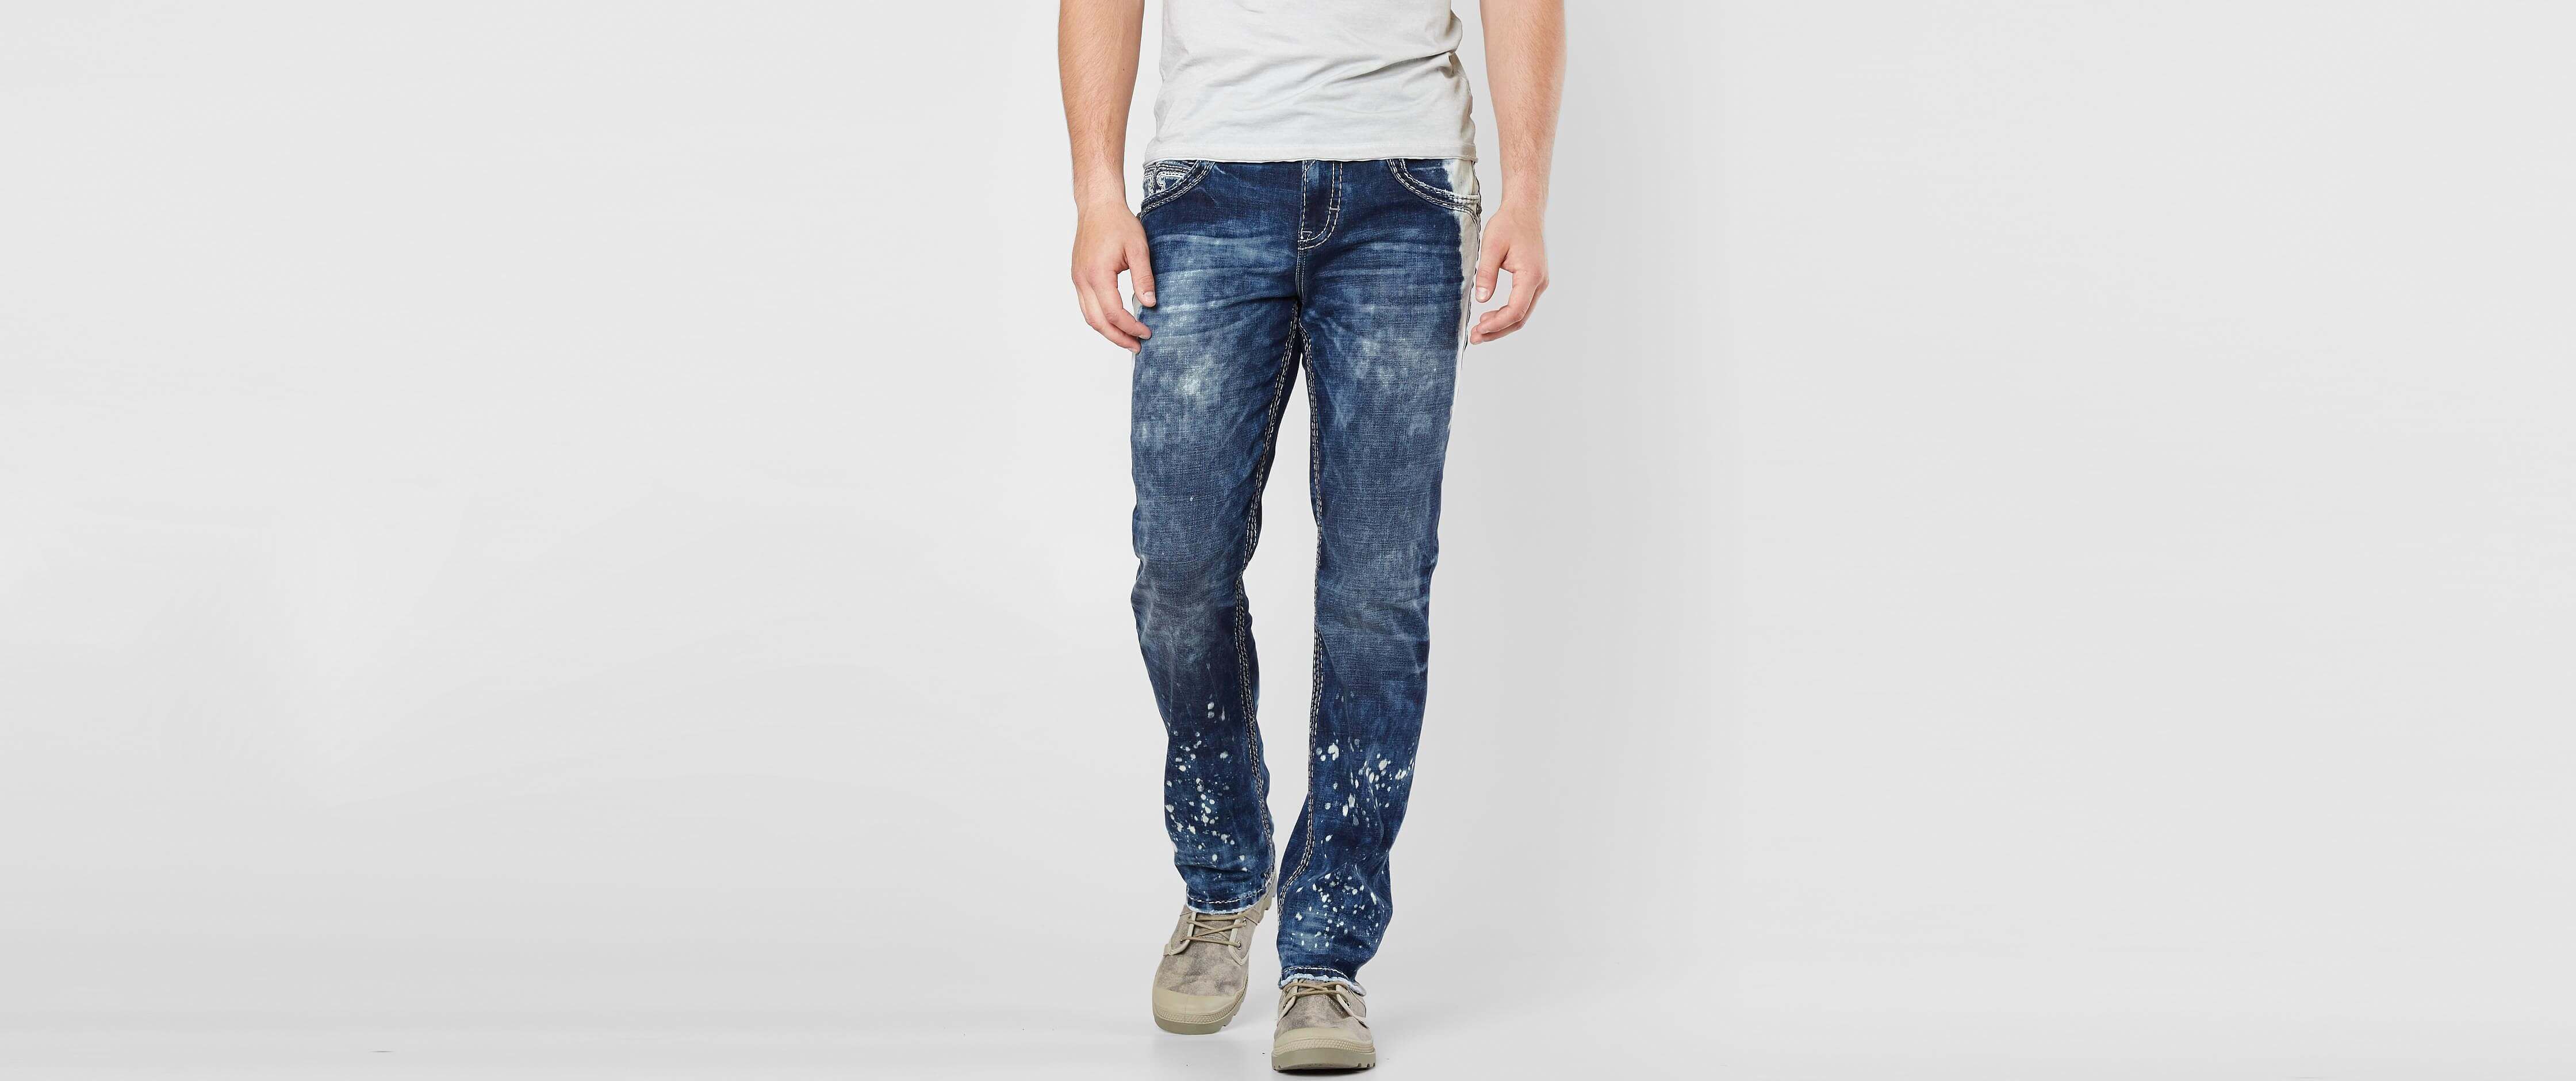 buckle jeans mens